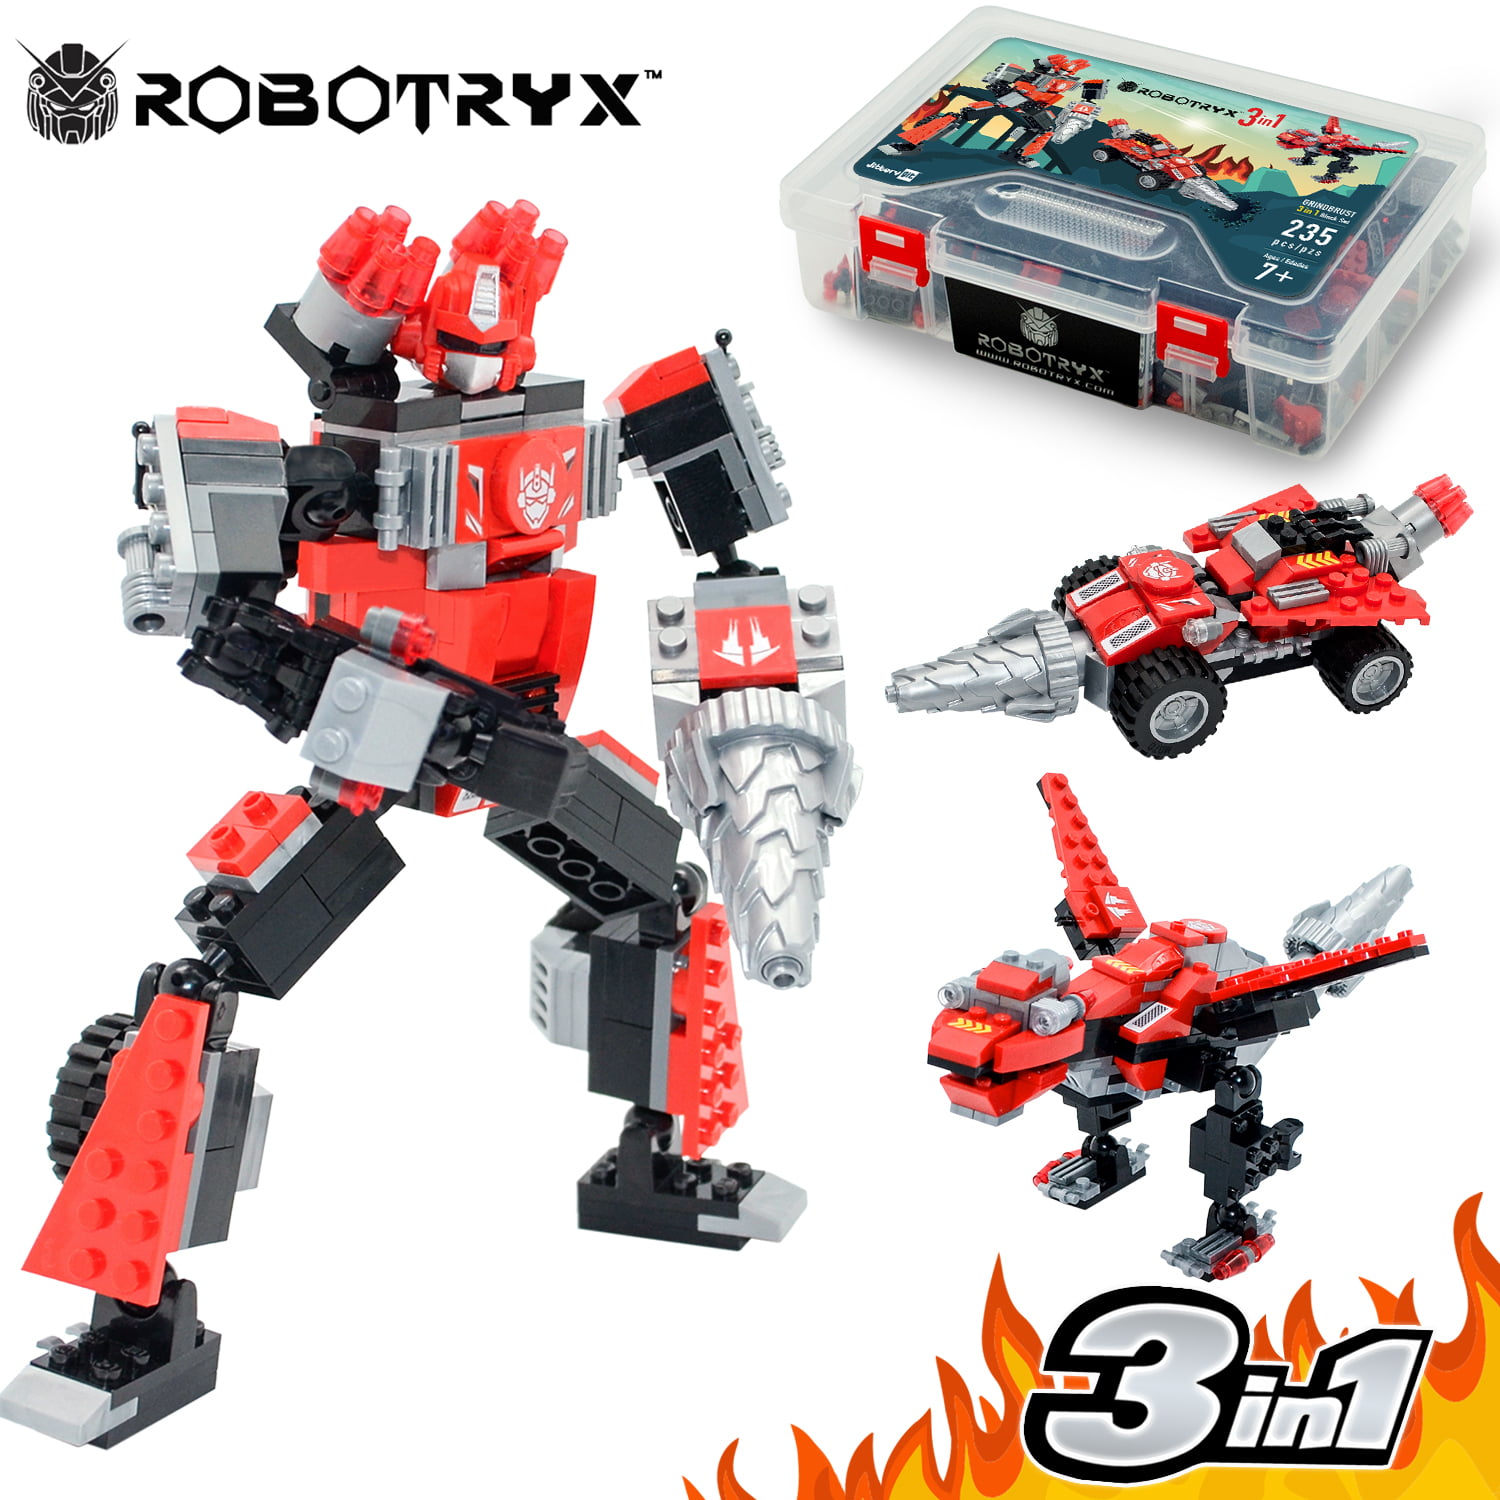 Robot STEM Toy | 3 In 1 Fun Creative Set | Construction Building Toys For Boys Ages 6-14 Years Old | Best Toy Gift For Kids | Free Poster Kit Included